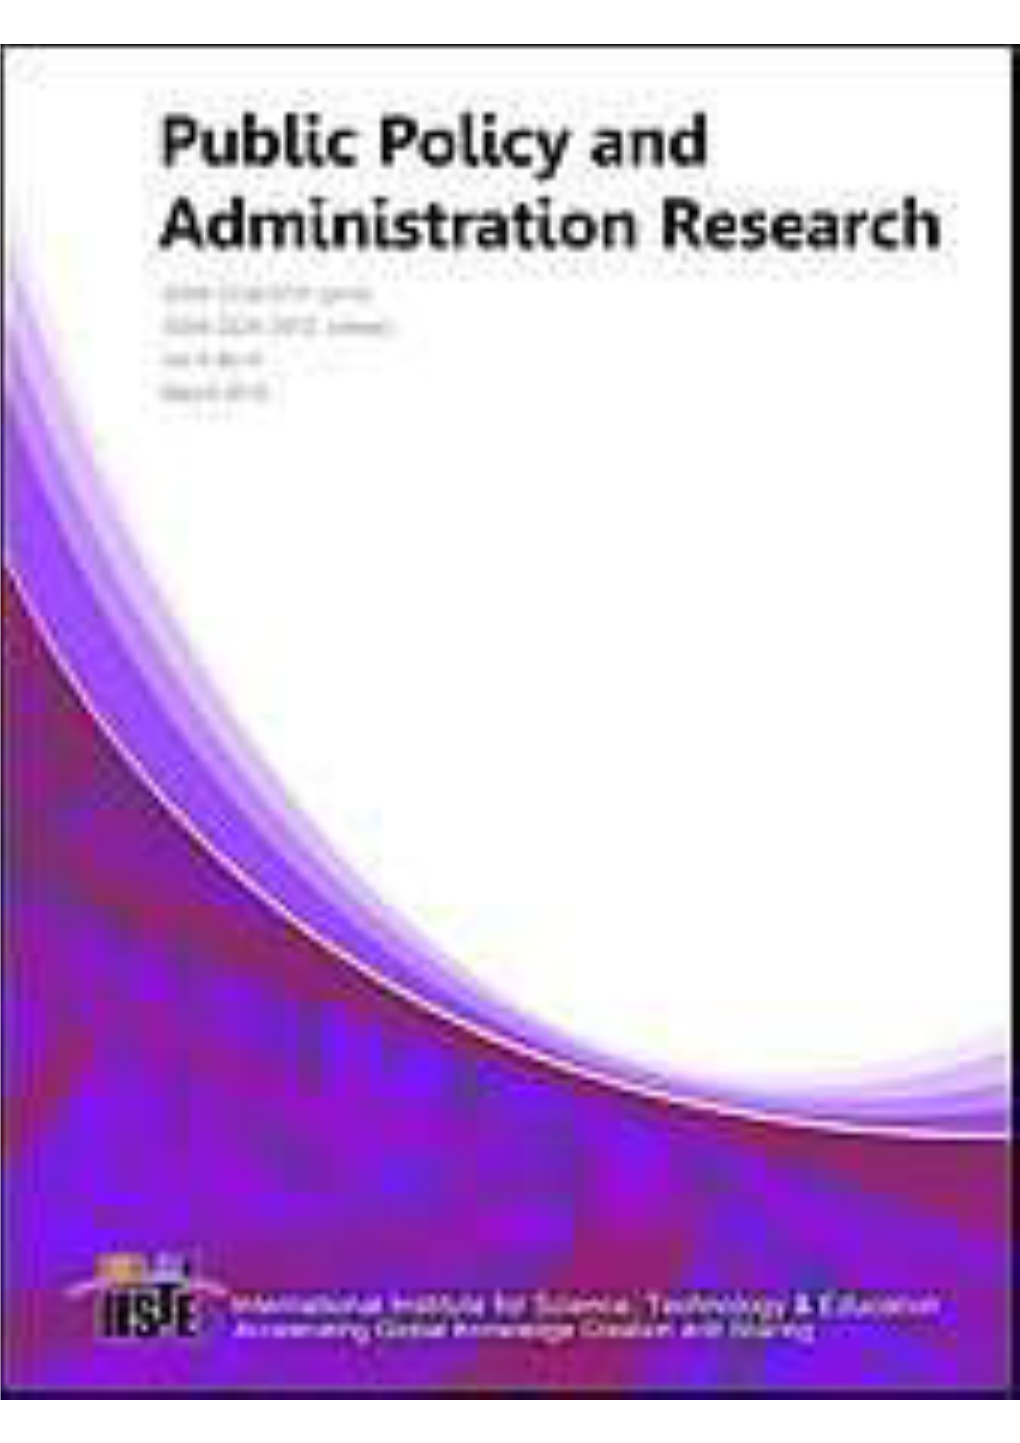 Public Policy and Administration Research Search